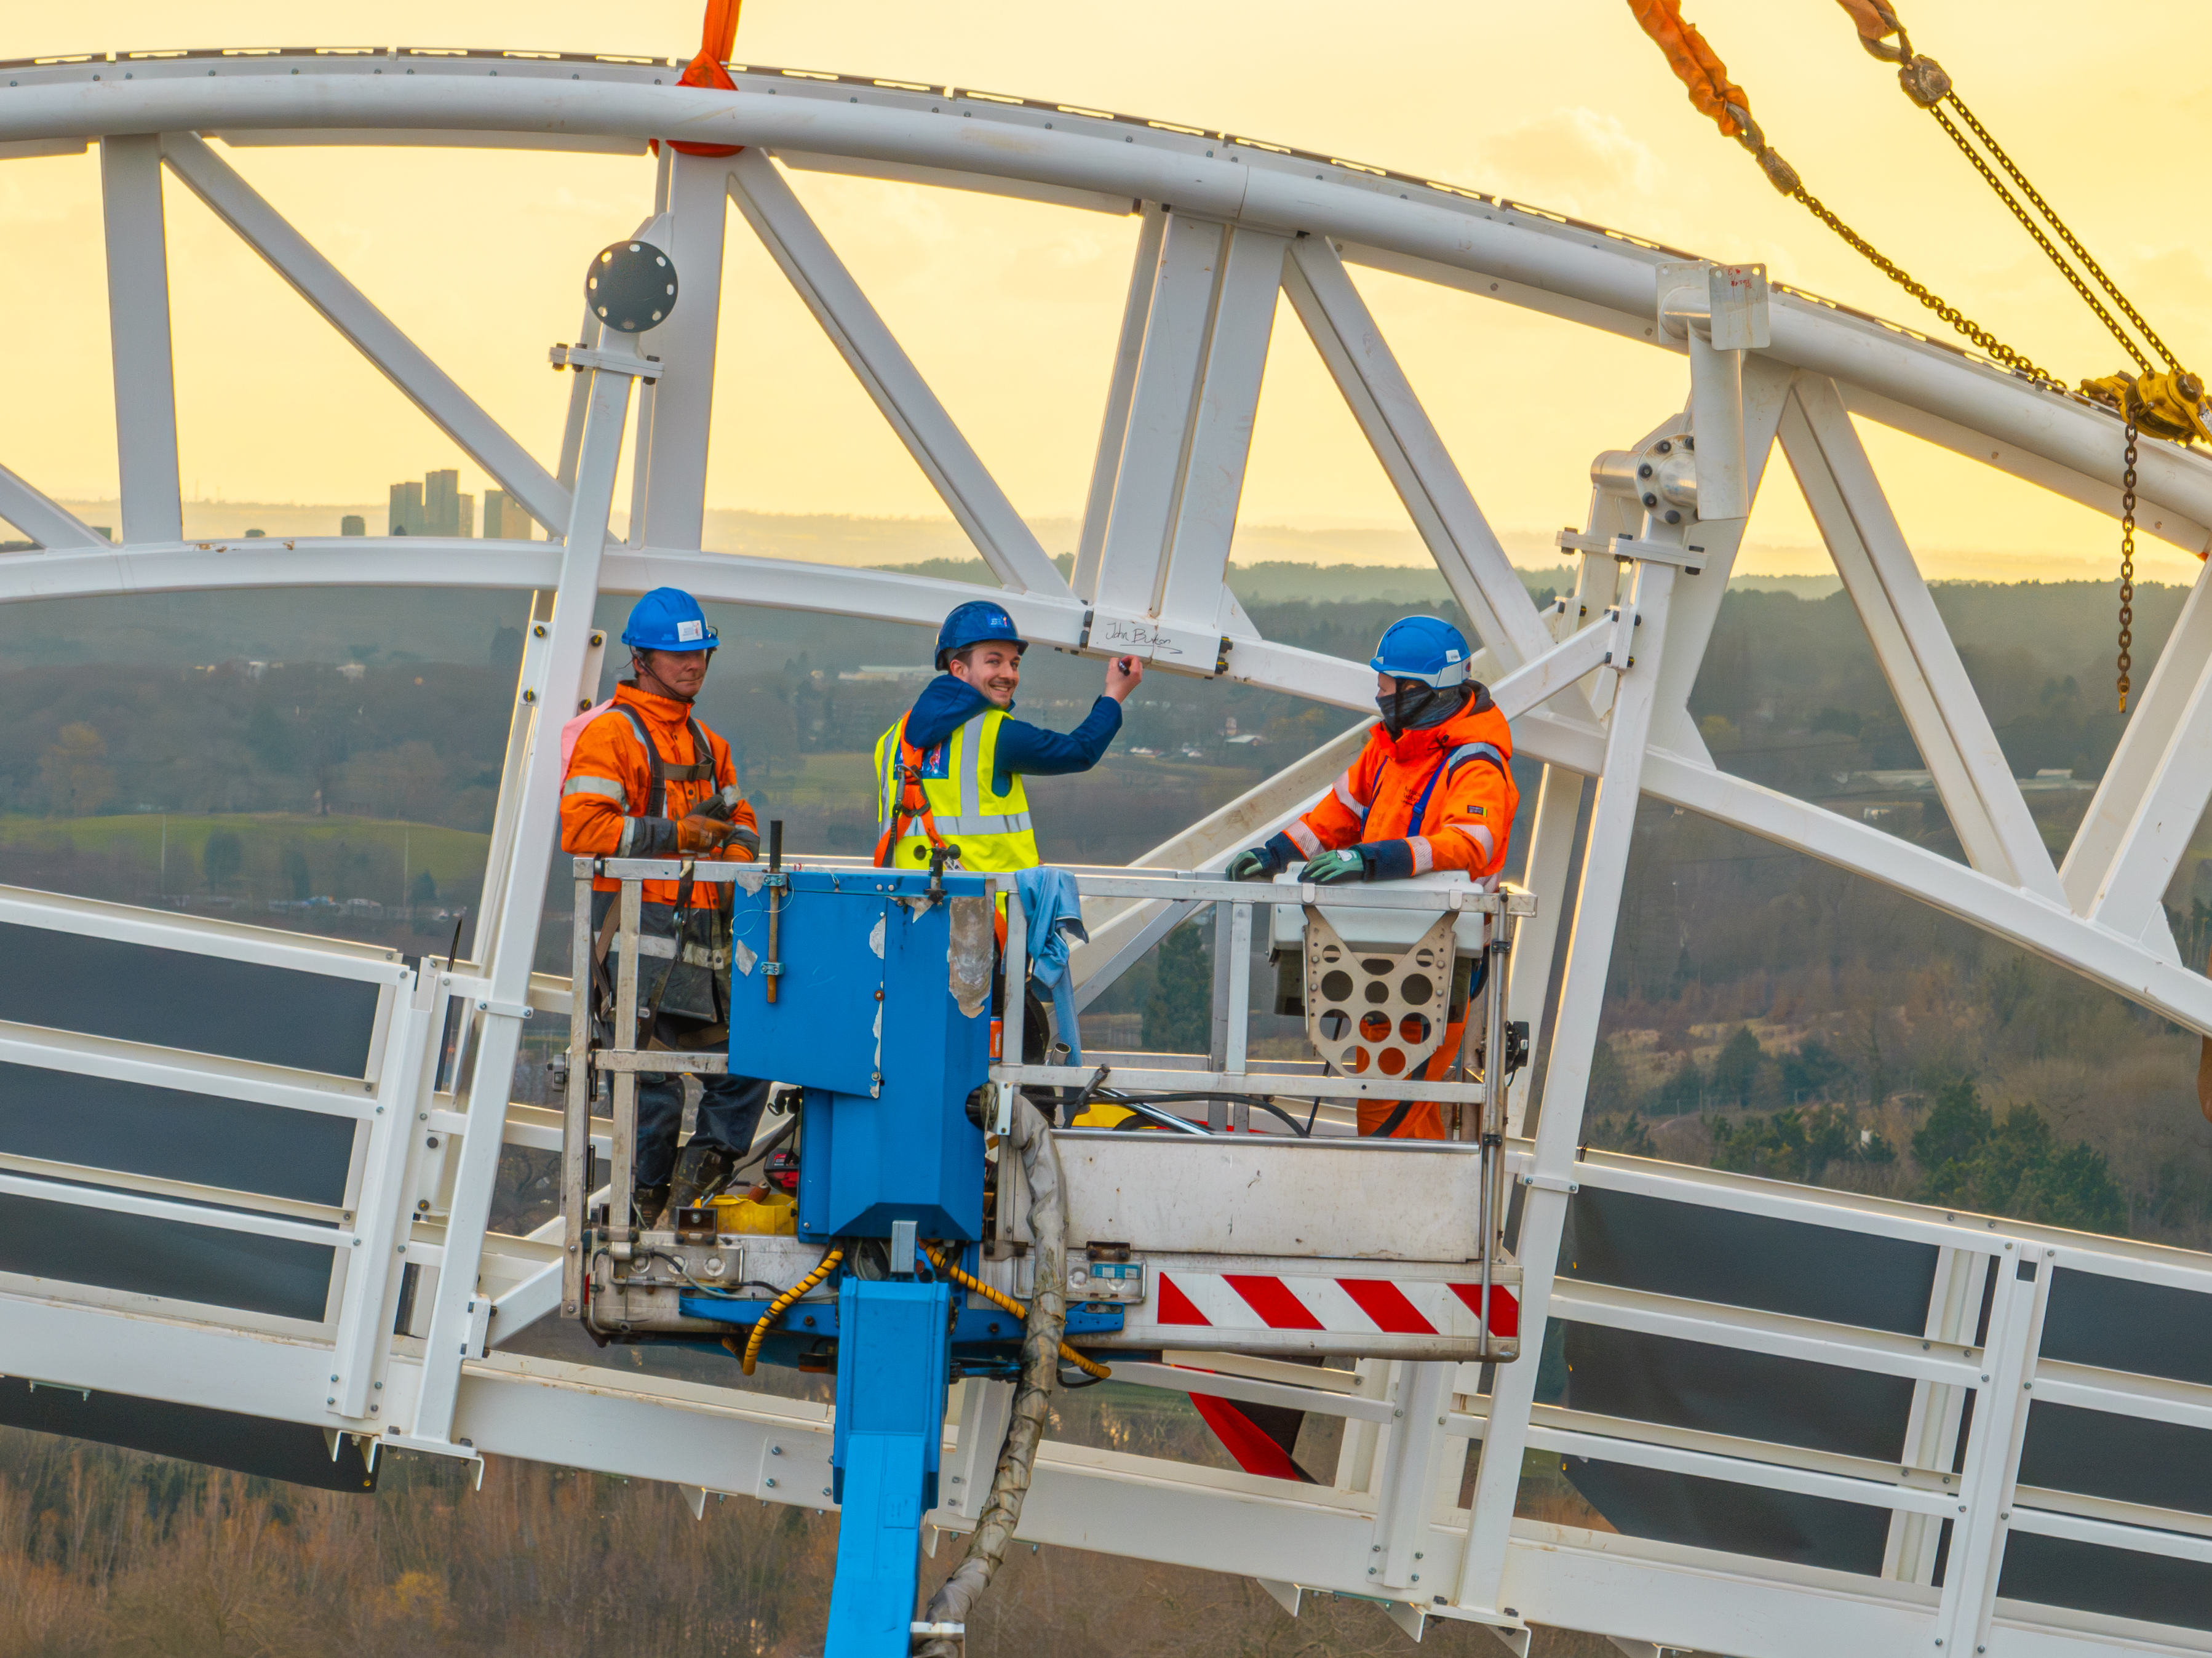 This week a 500-tonne crane helped lift the 92nd and final piece of the ride into place